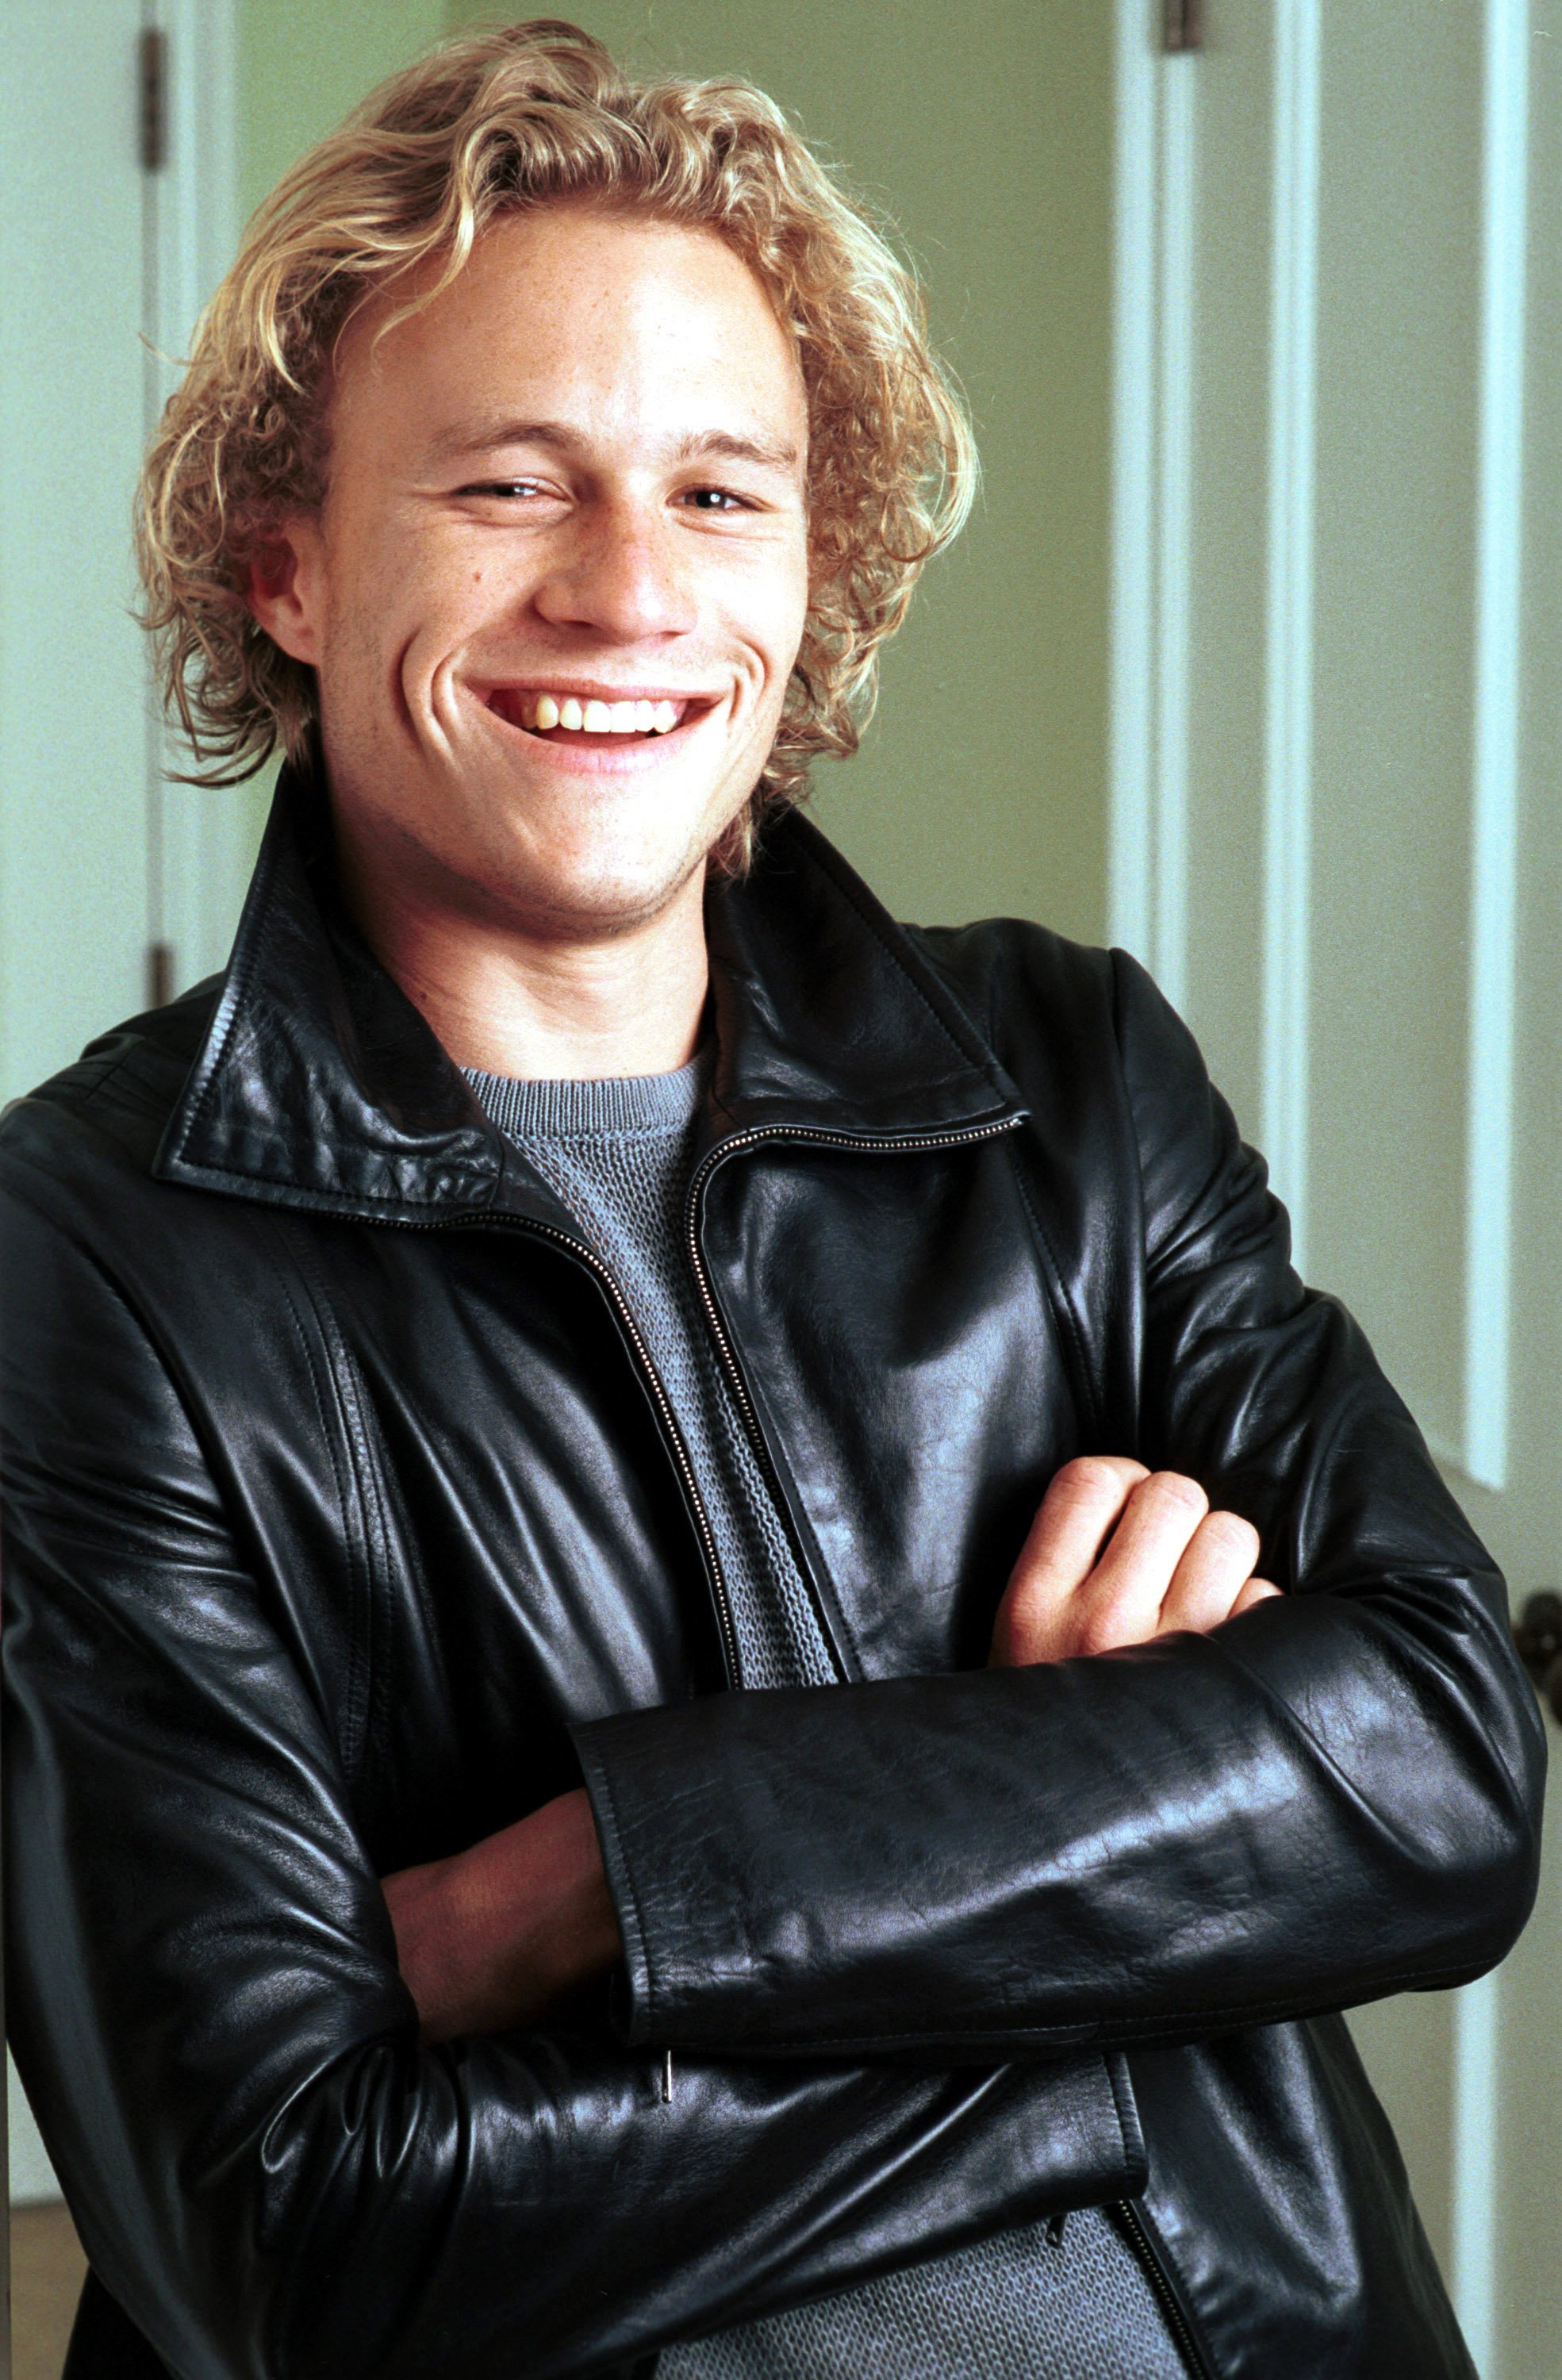 Heath Ledger photographed in 2000. | Source: Getty Images